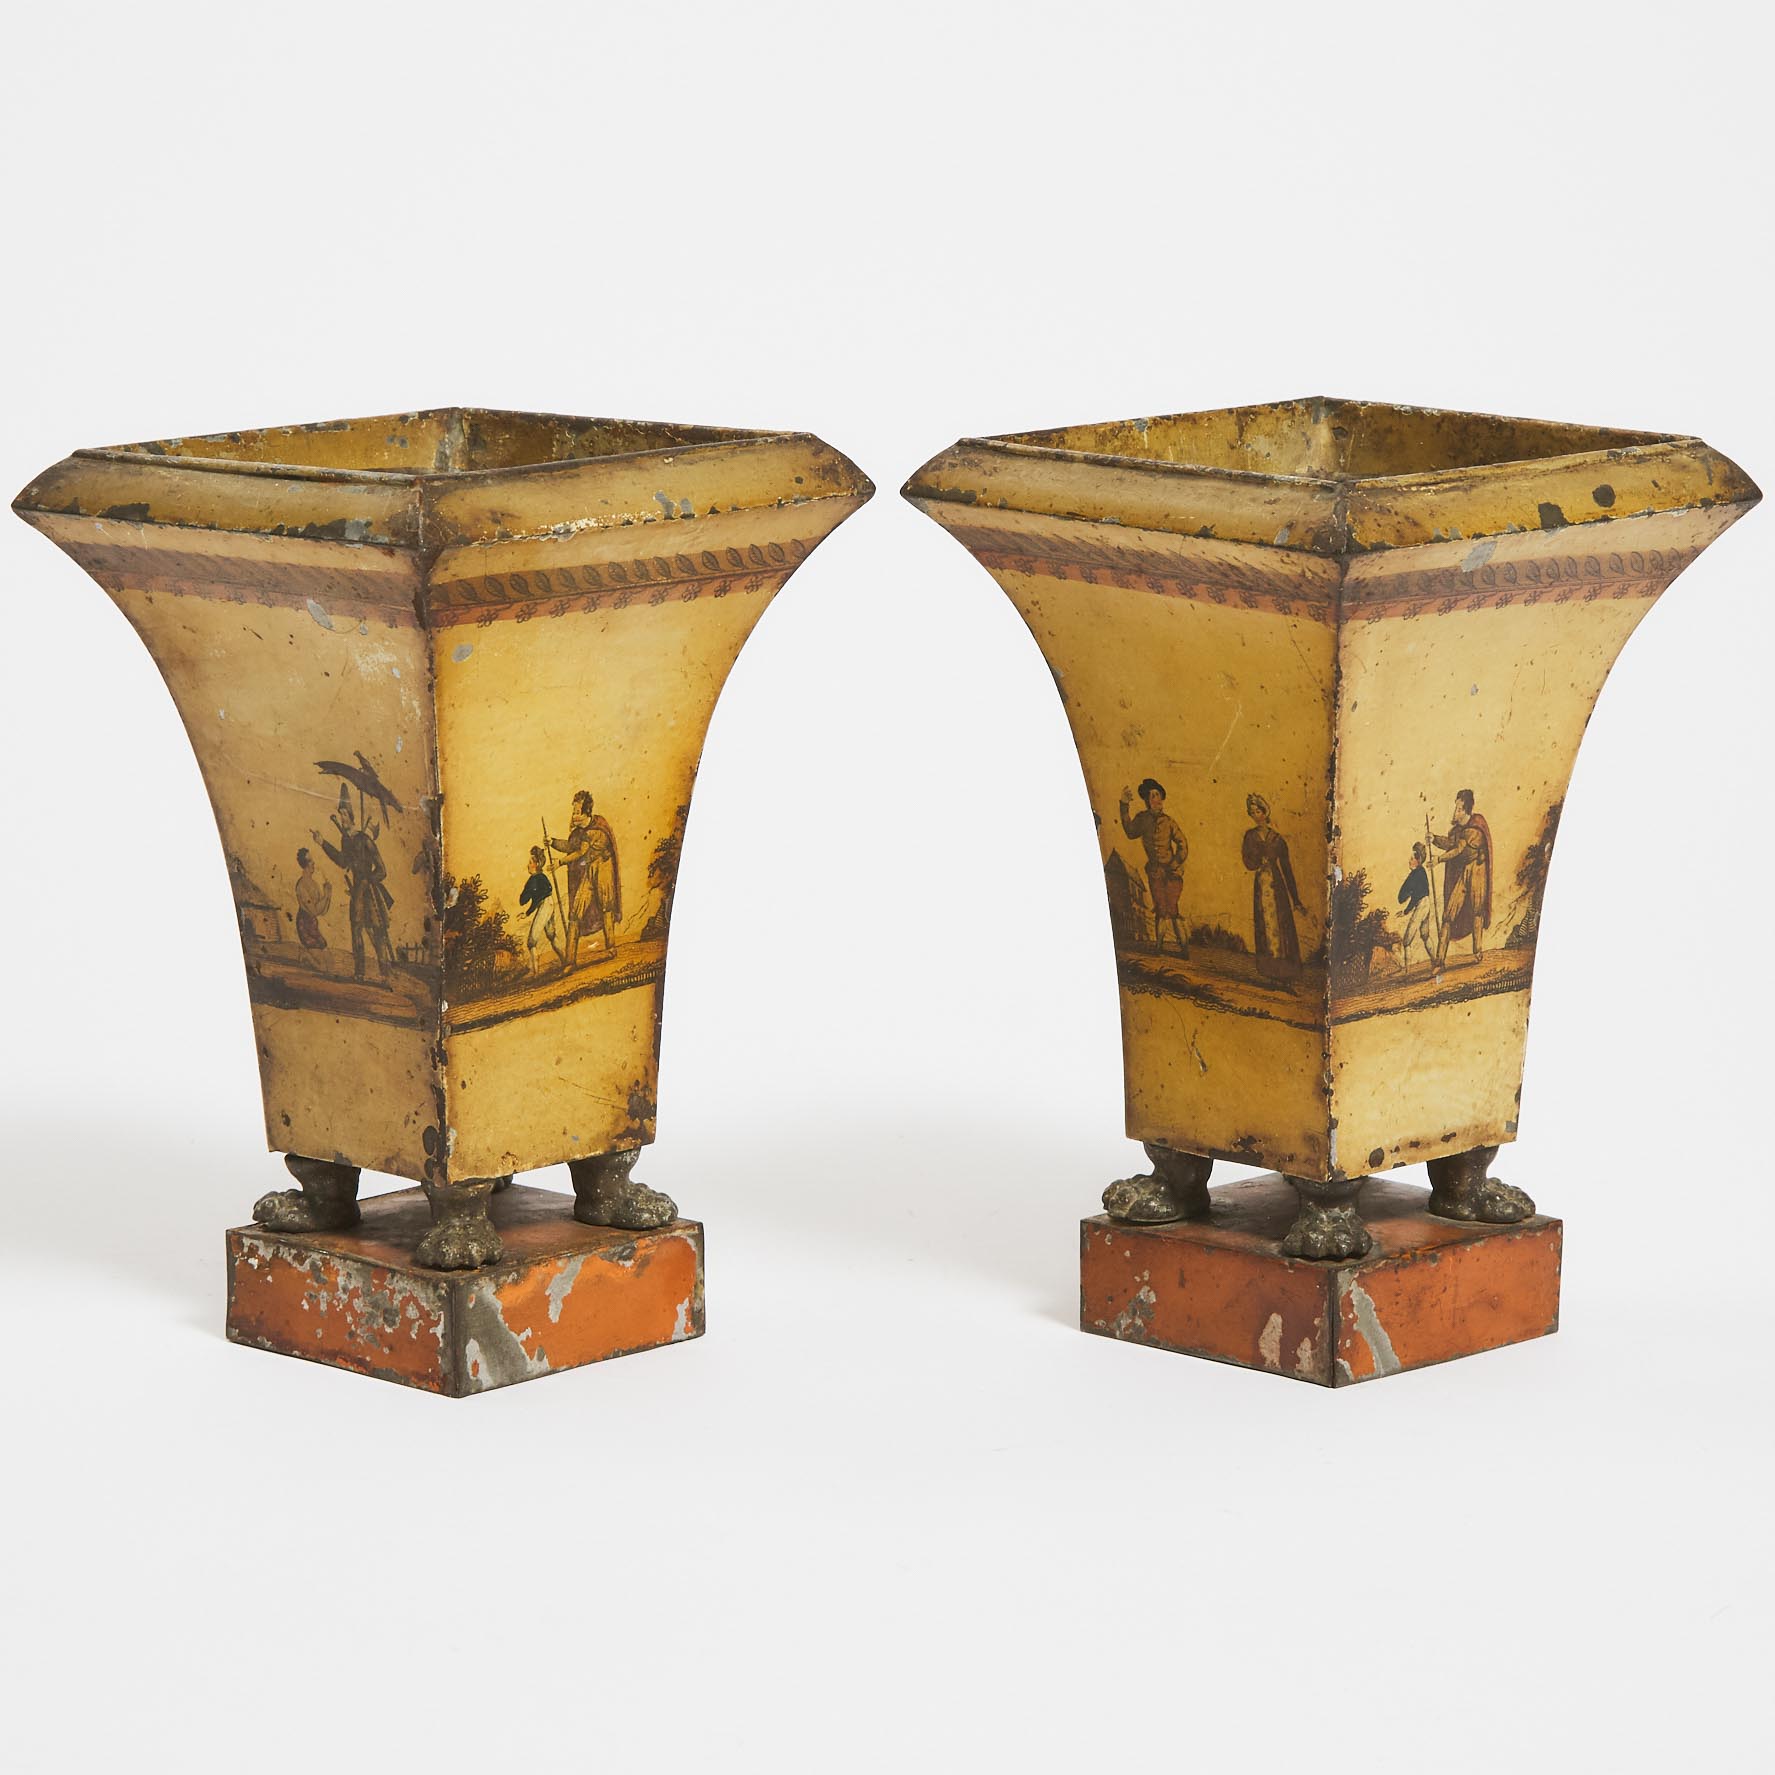 Pair of French Tole Mantle Jardinieres, c.1830